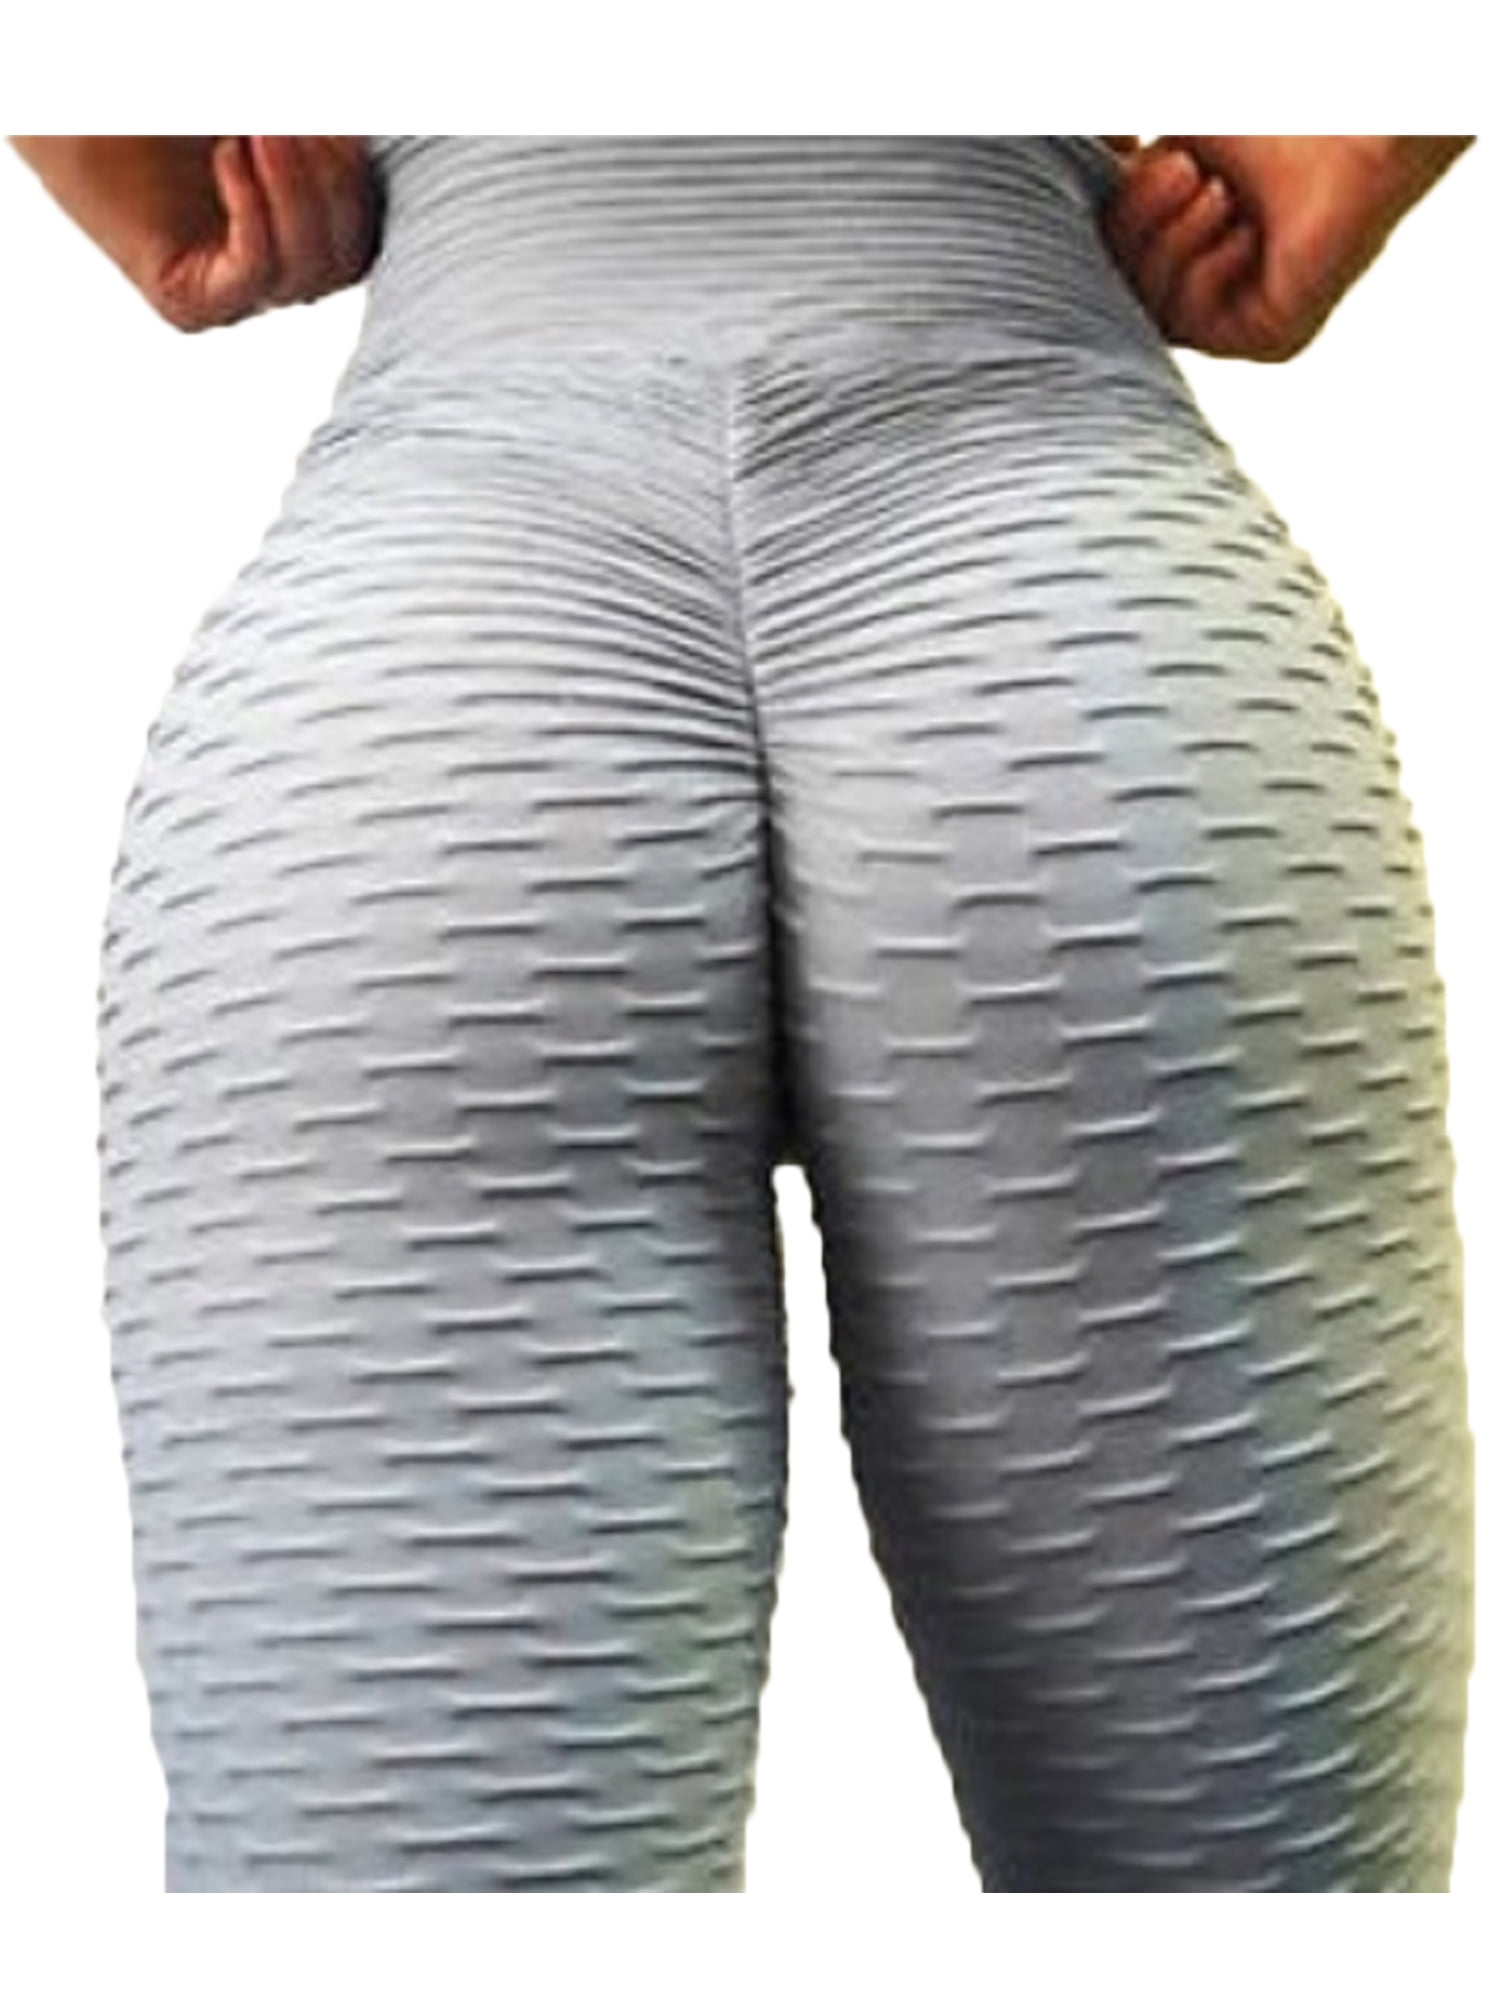 Details about   Women  Push Up Trousers Yoga Gym Ruched Pants Butt Lift Anti-Cellulite Leggings 